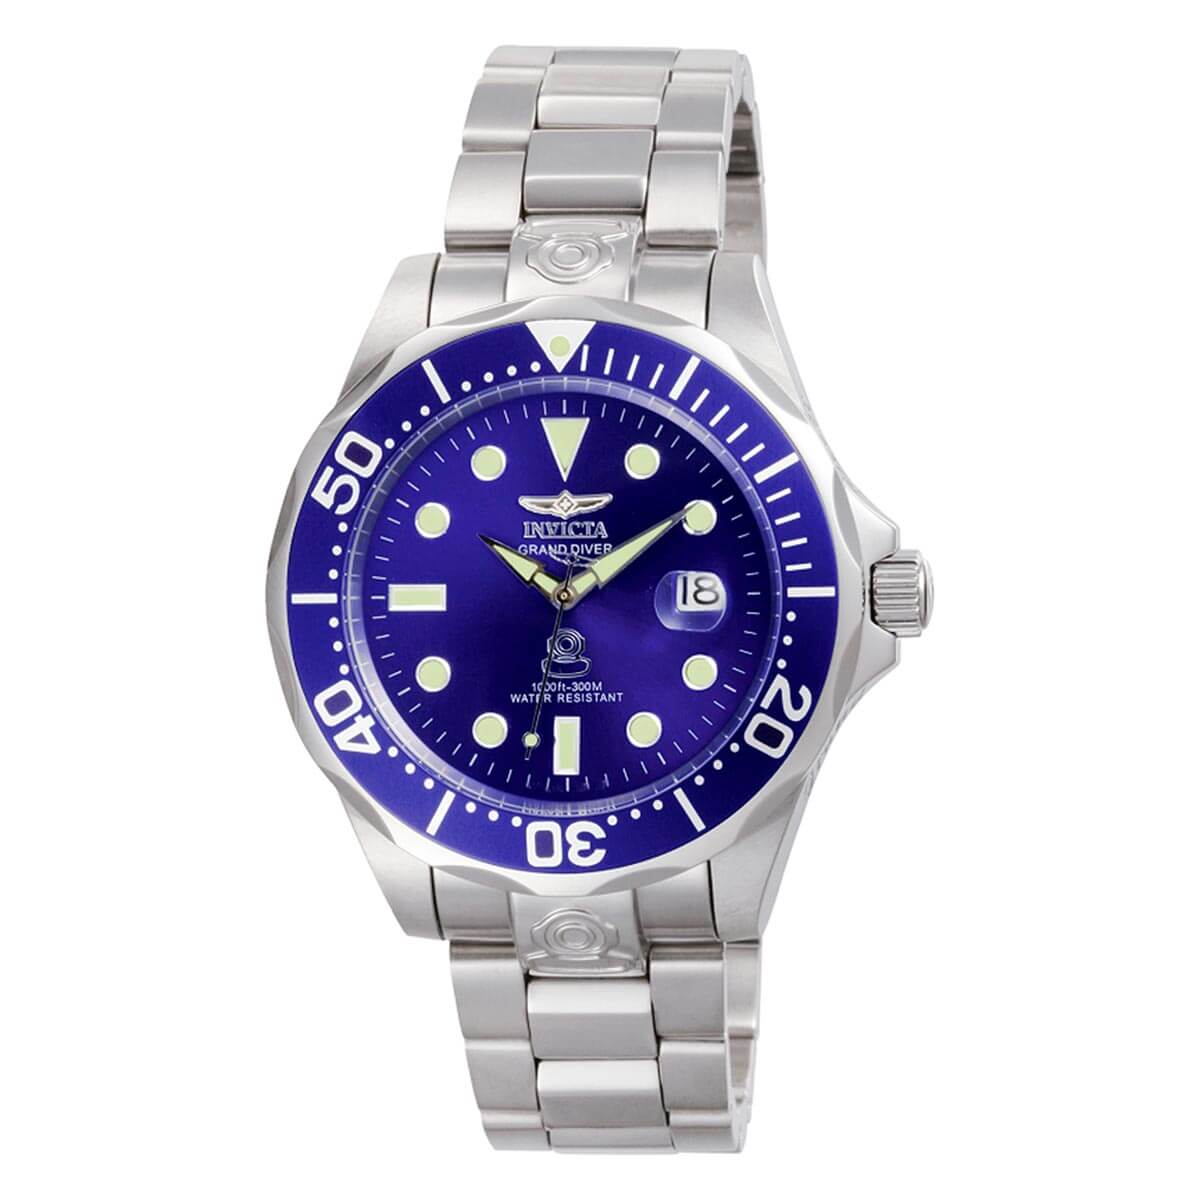 Invicta Men's Automatic Watch - Grand Diver Stainless Steel